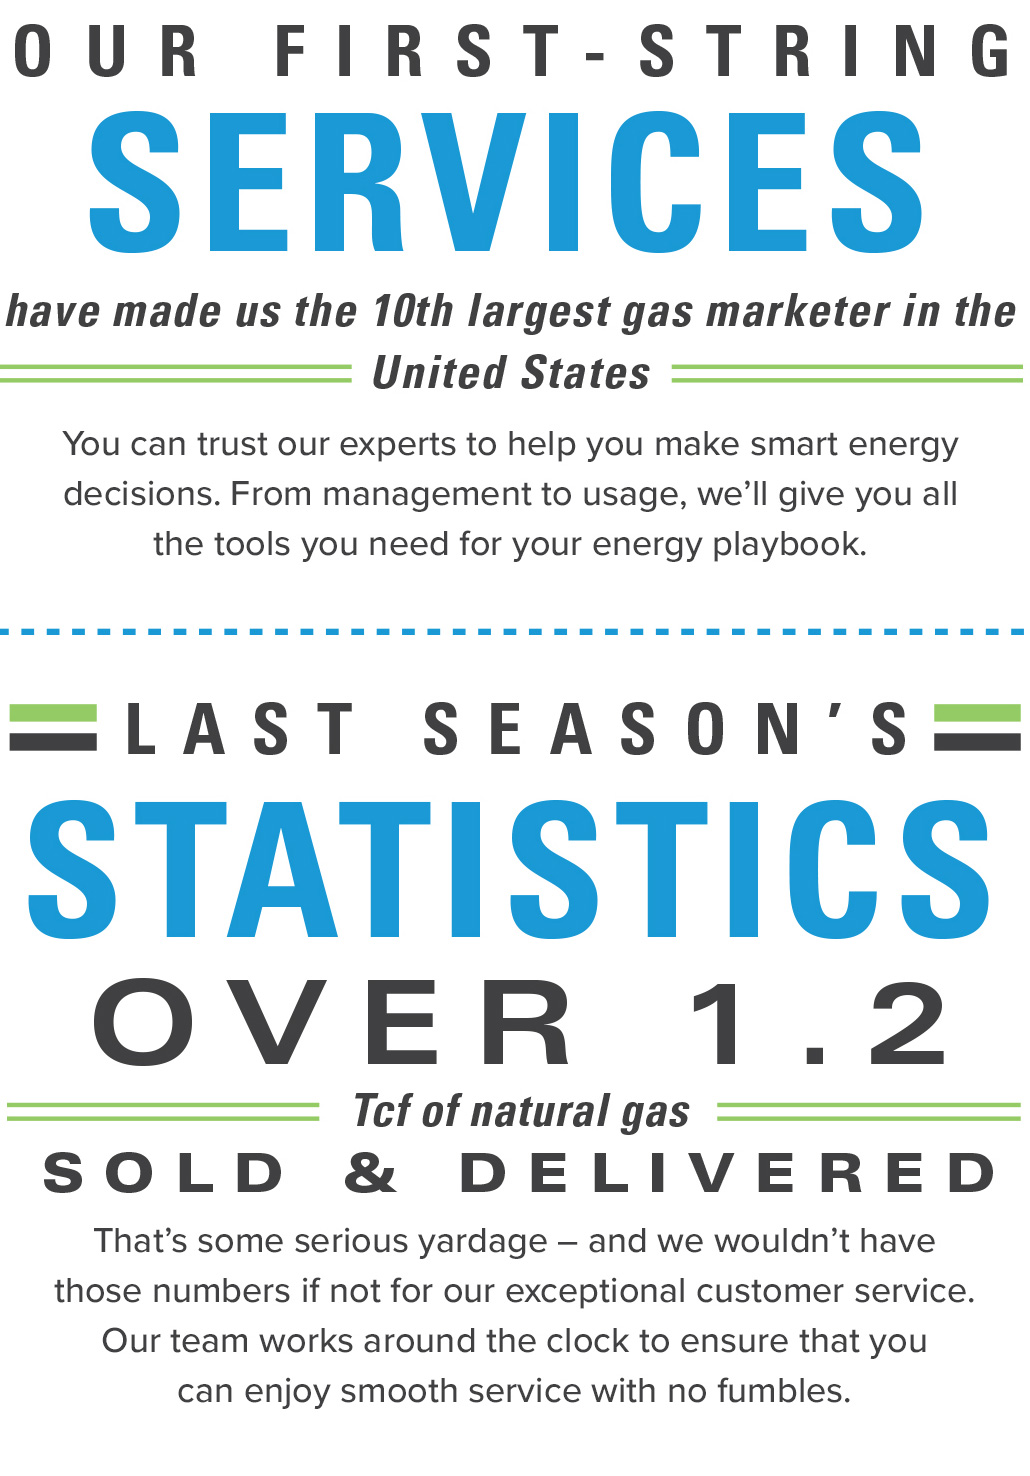 Our first-string services have made us the 10th largest gas marketer in the United States. You can trust our experts to help you make smart energy decisions. From management to useage, we'll give you all the tools you need for your energy playbook. Last season's statistics: over 1.2 Tcf of natural gas sold and delivered. That's some serious yardage — and we wouldn't have those numbers if not for our exceptional customer service. Our team works around the clock to ensure that you can enjoy smooth service with no fumbles.